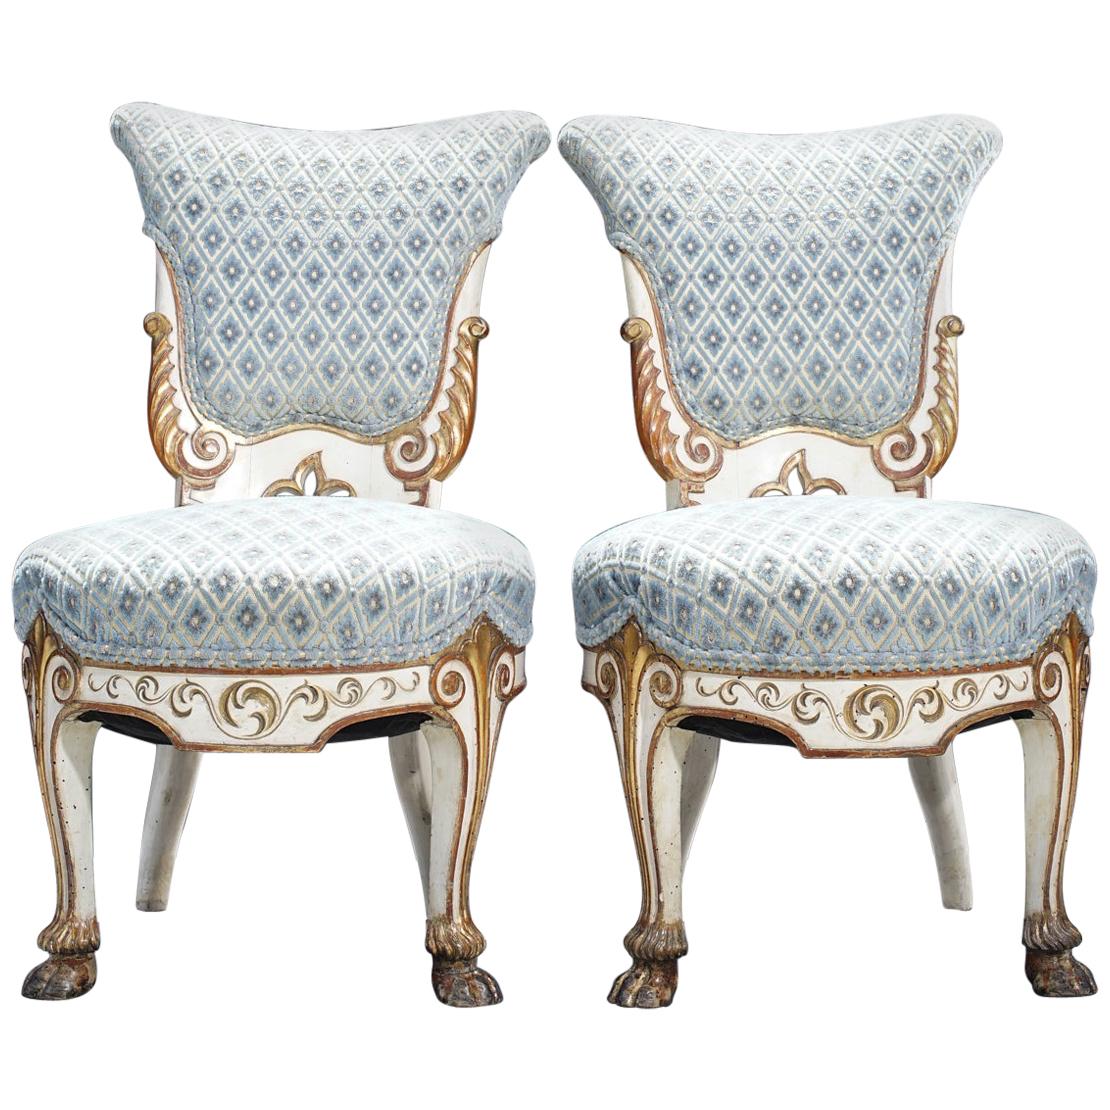 Pair of 19th Century Italian Giltwood and Painted Side Chairs For Sale